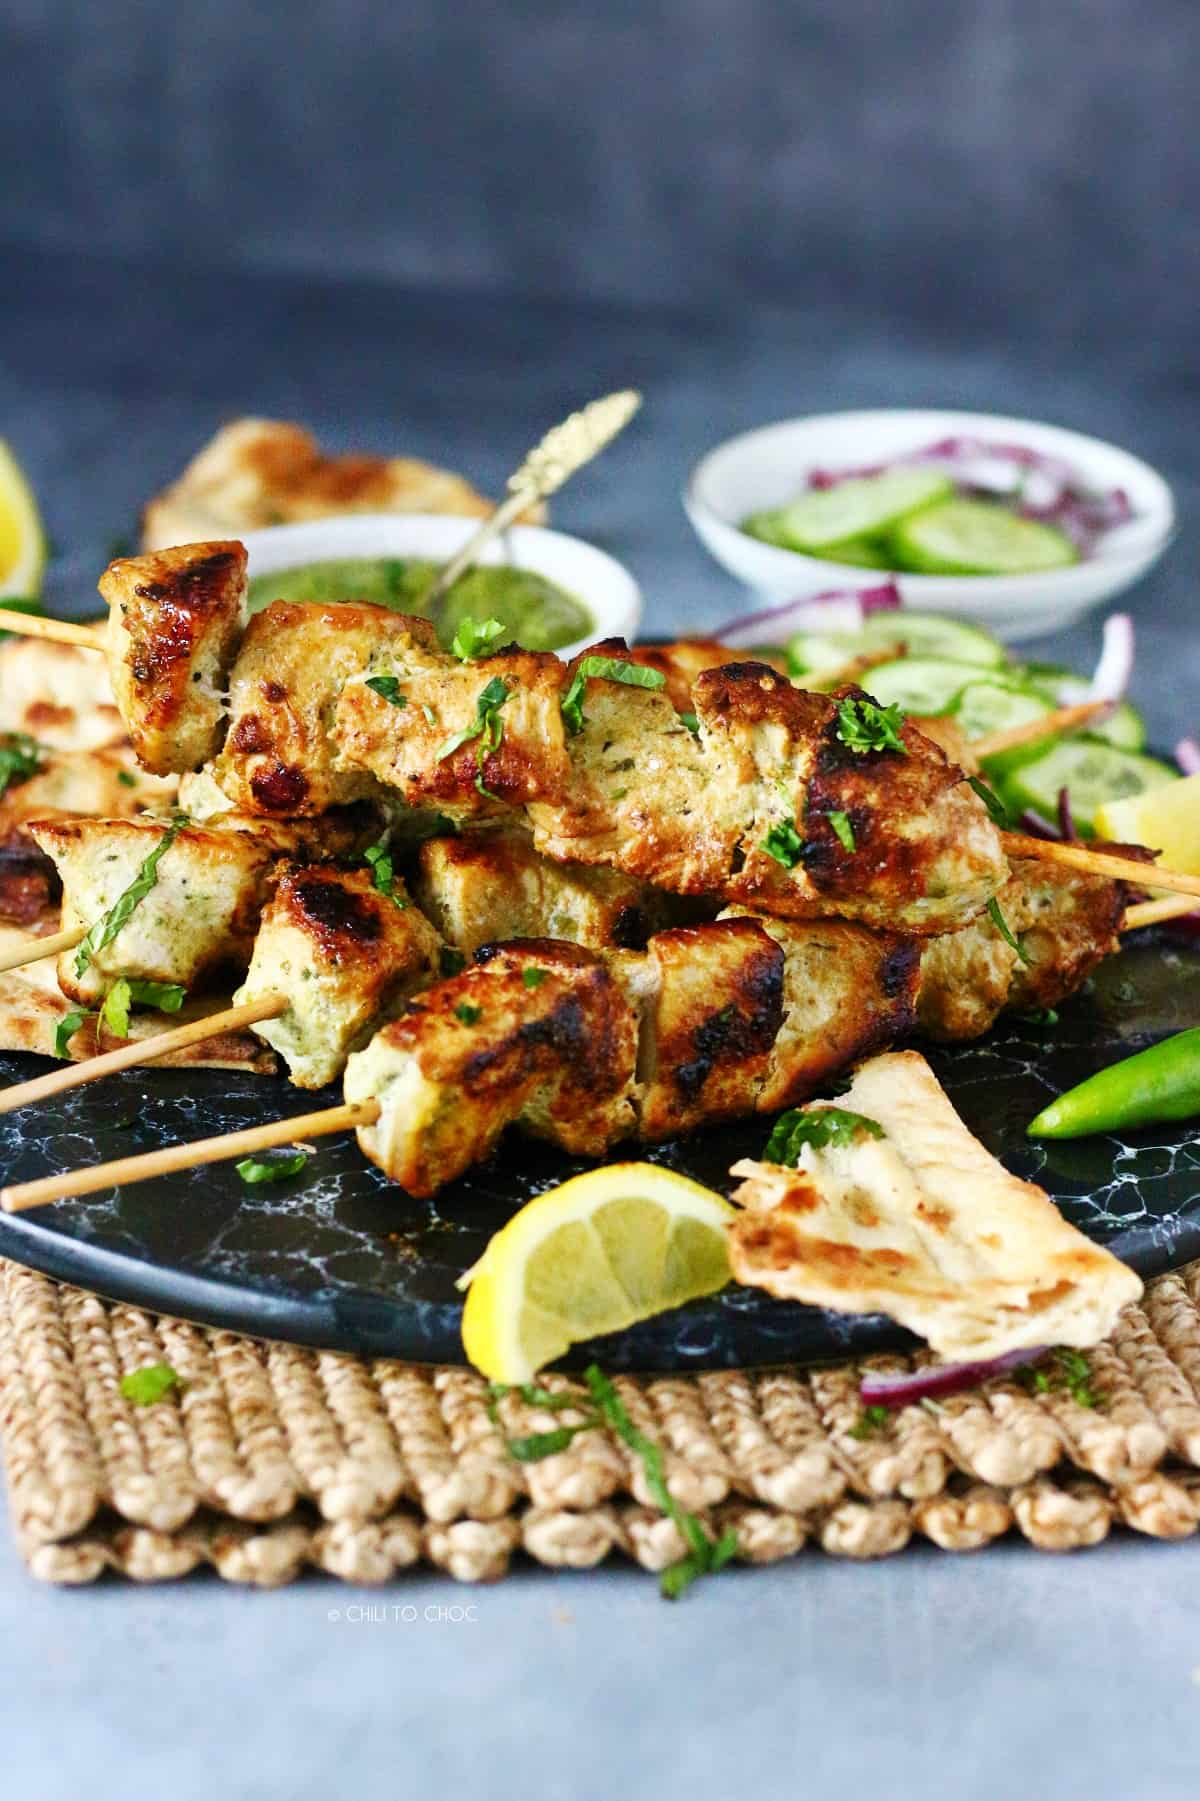 Chicken malai boti skewers stacked on each other with a piece of naan on the side.